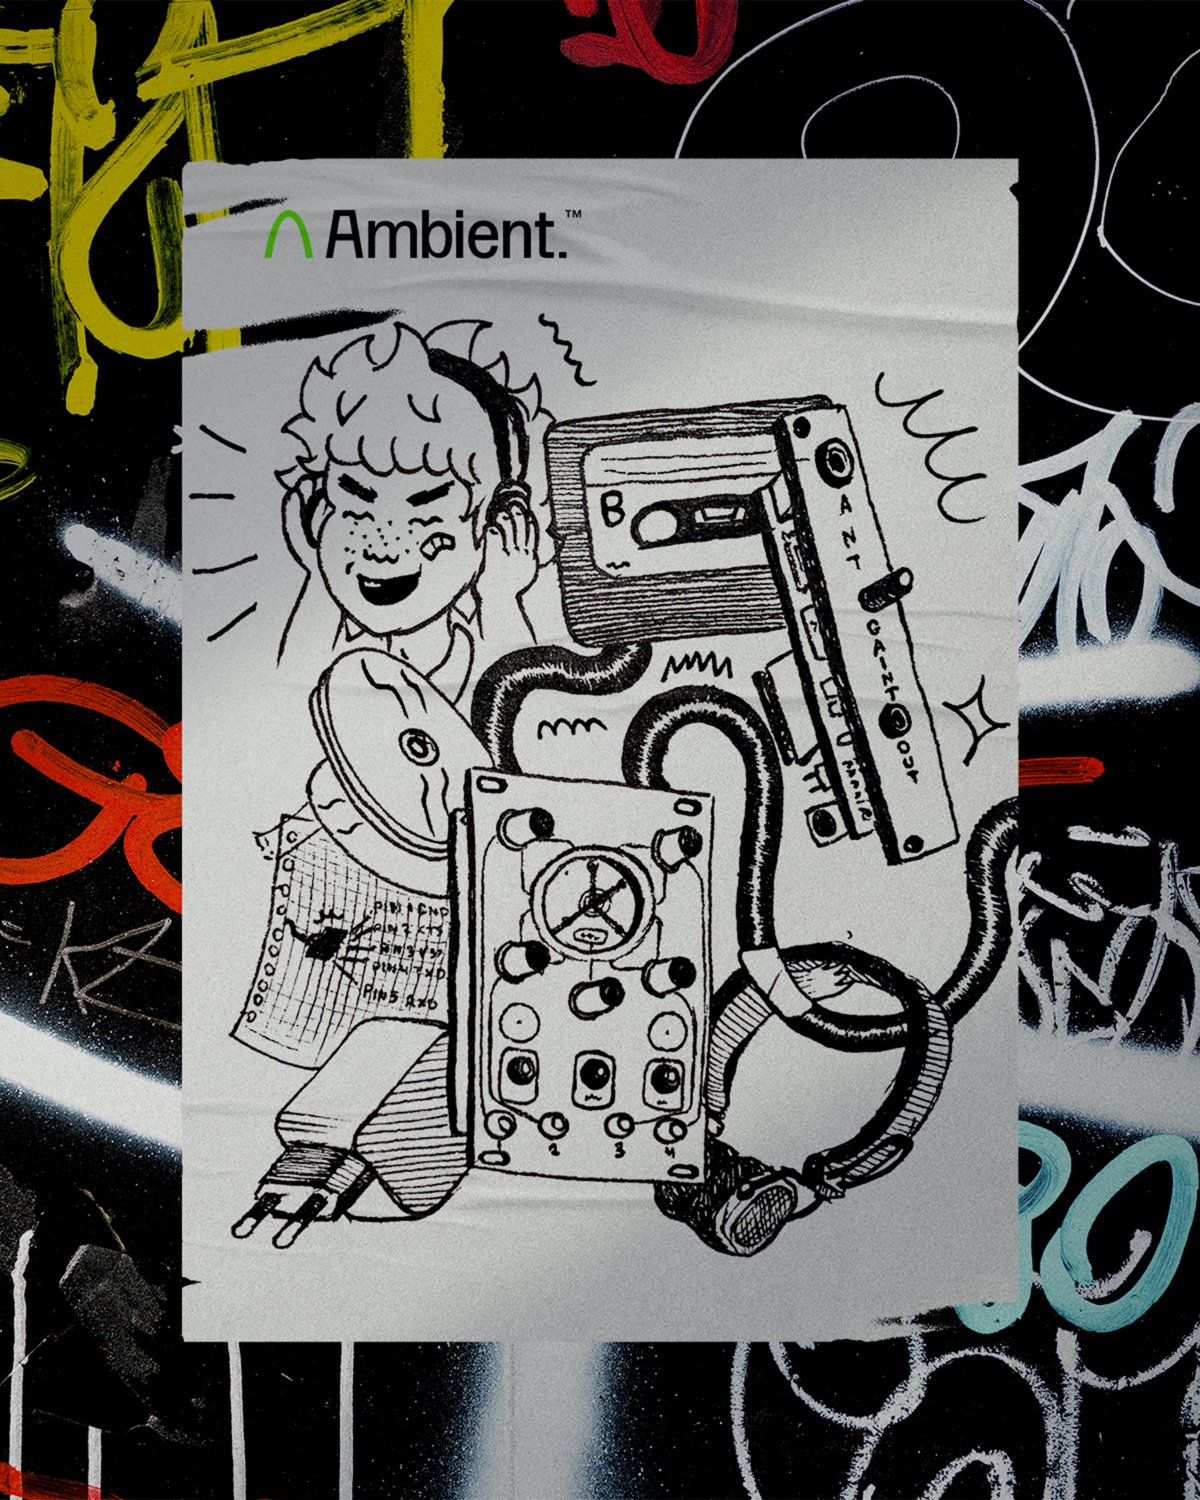 Ambient A3 poster